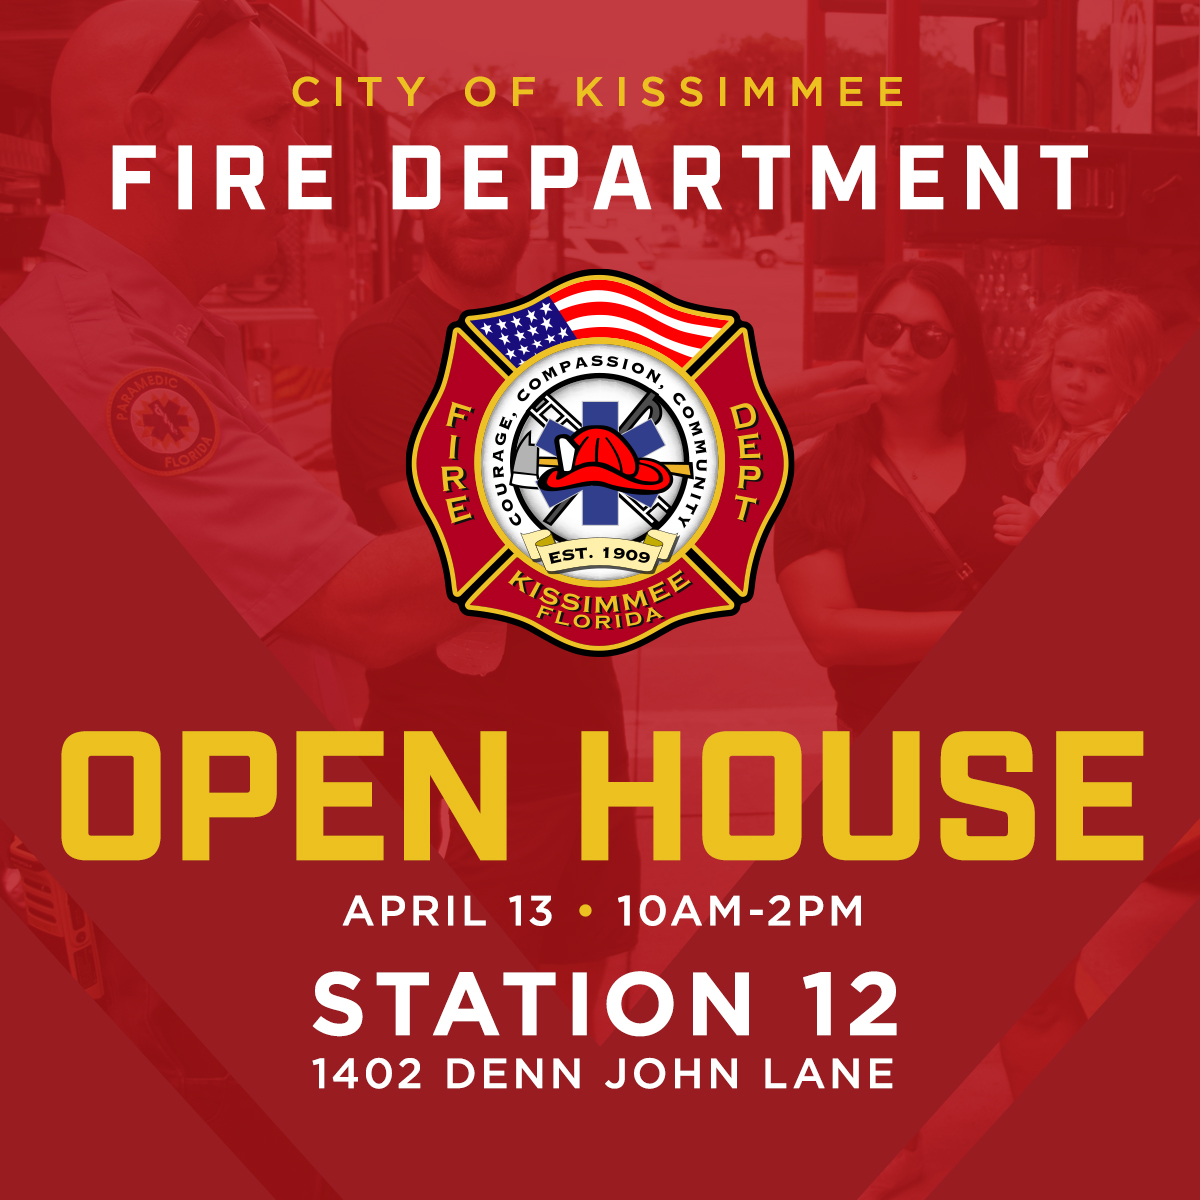 Fire Station 12 (1402 Denn John Lane) will host KFD's first open house of the year on Saturday, April 13, from 10 am to 2 pm. There will be free food, activities, live demonstrations, and firsthand glimpses into daily life as a firefighter.